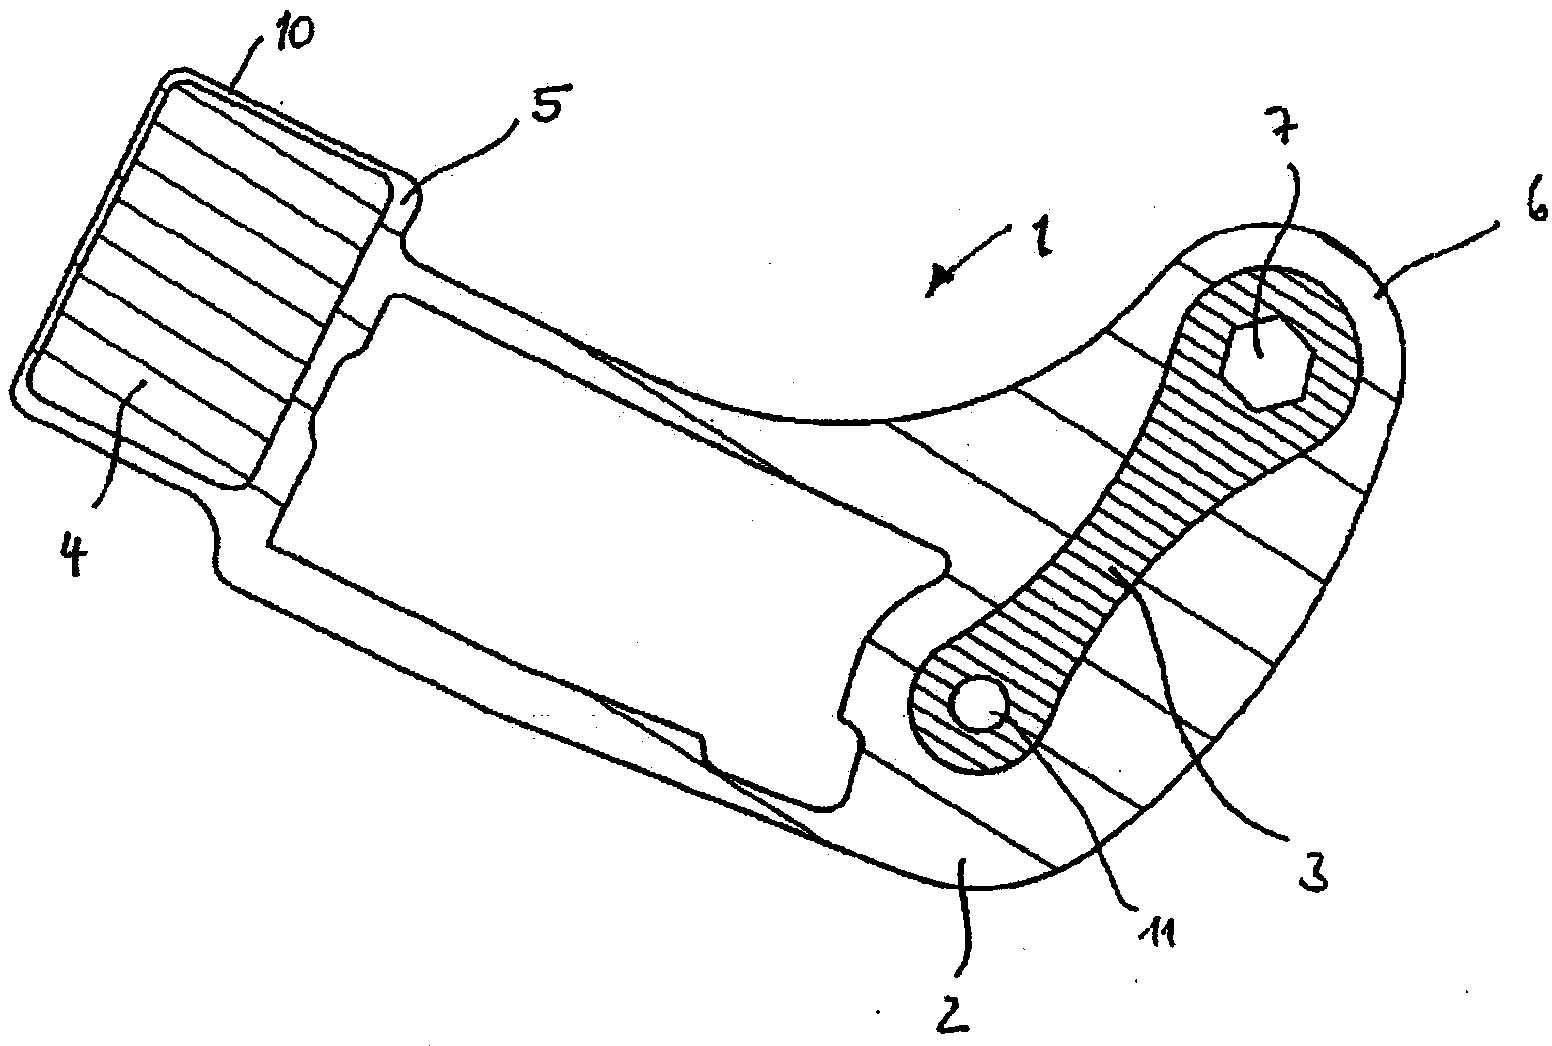 Method for assembling gearbox components